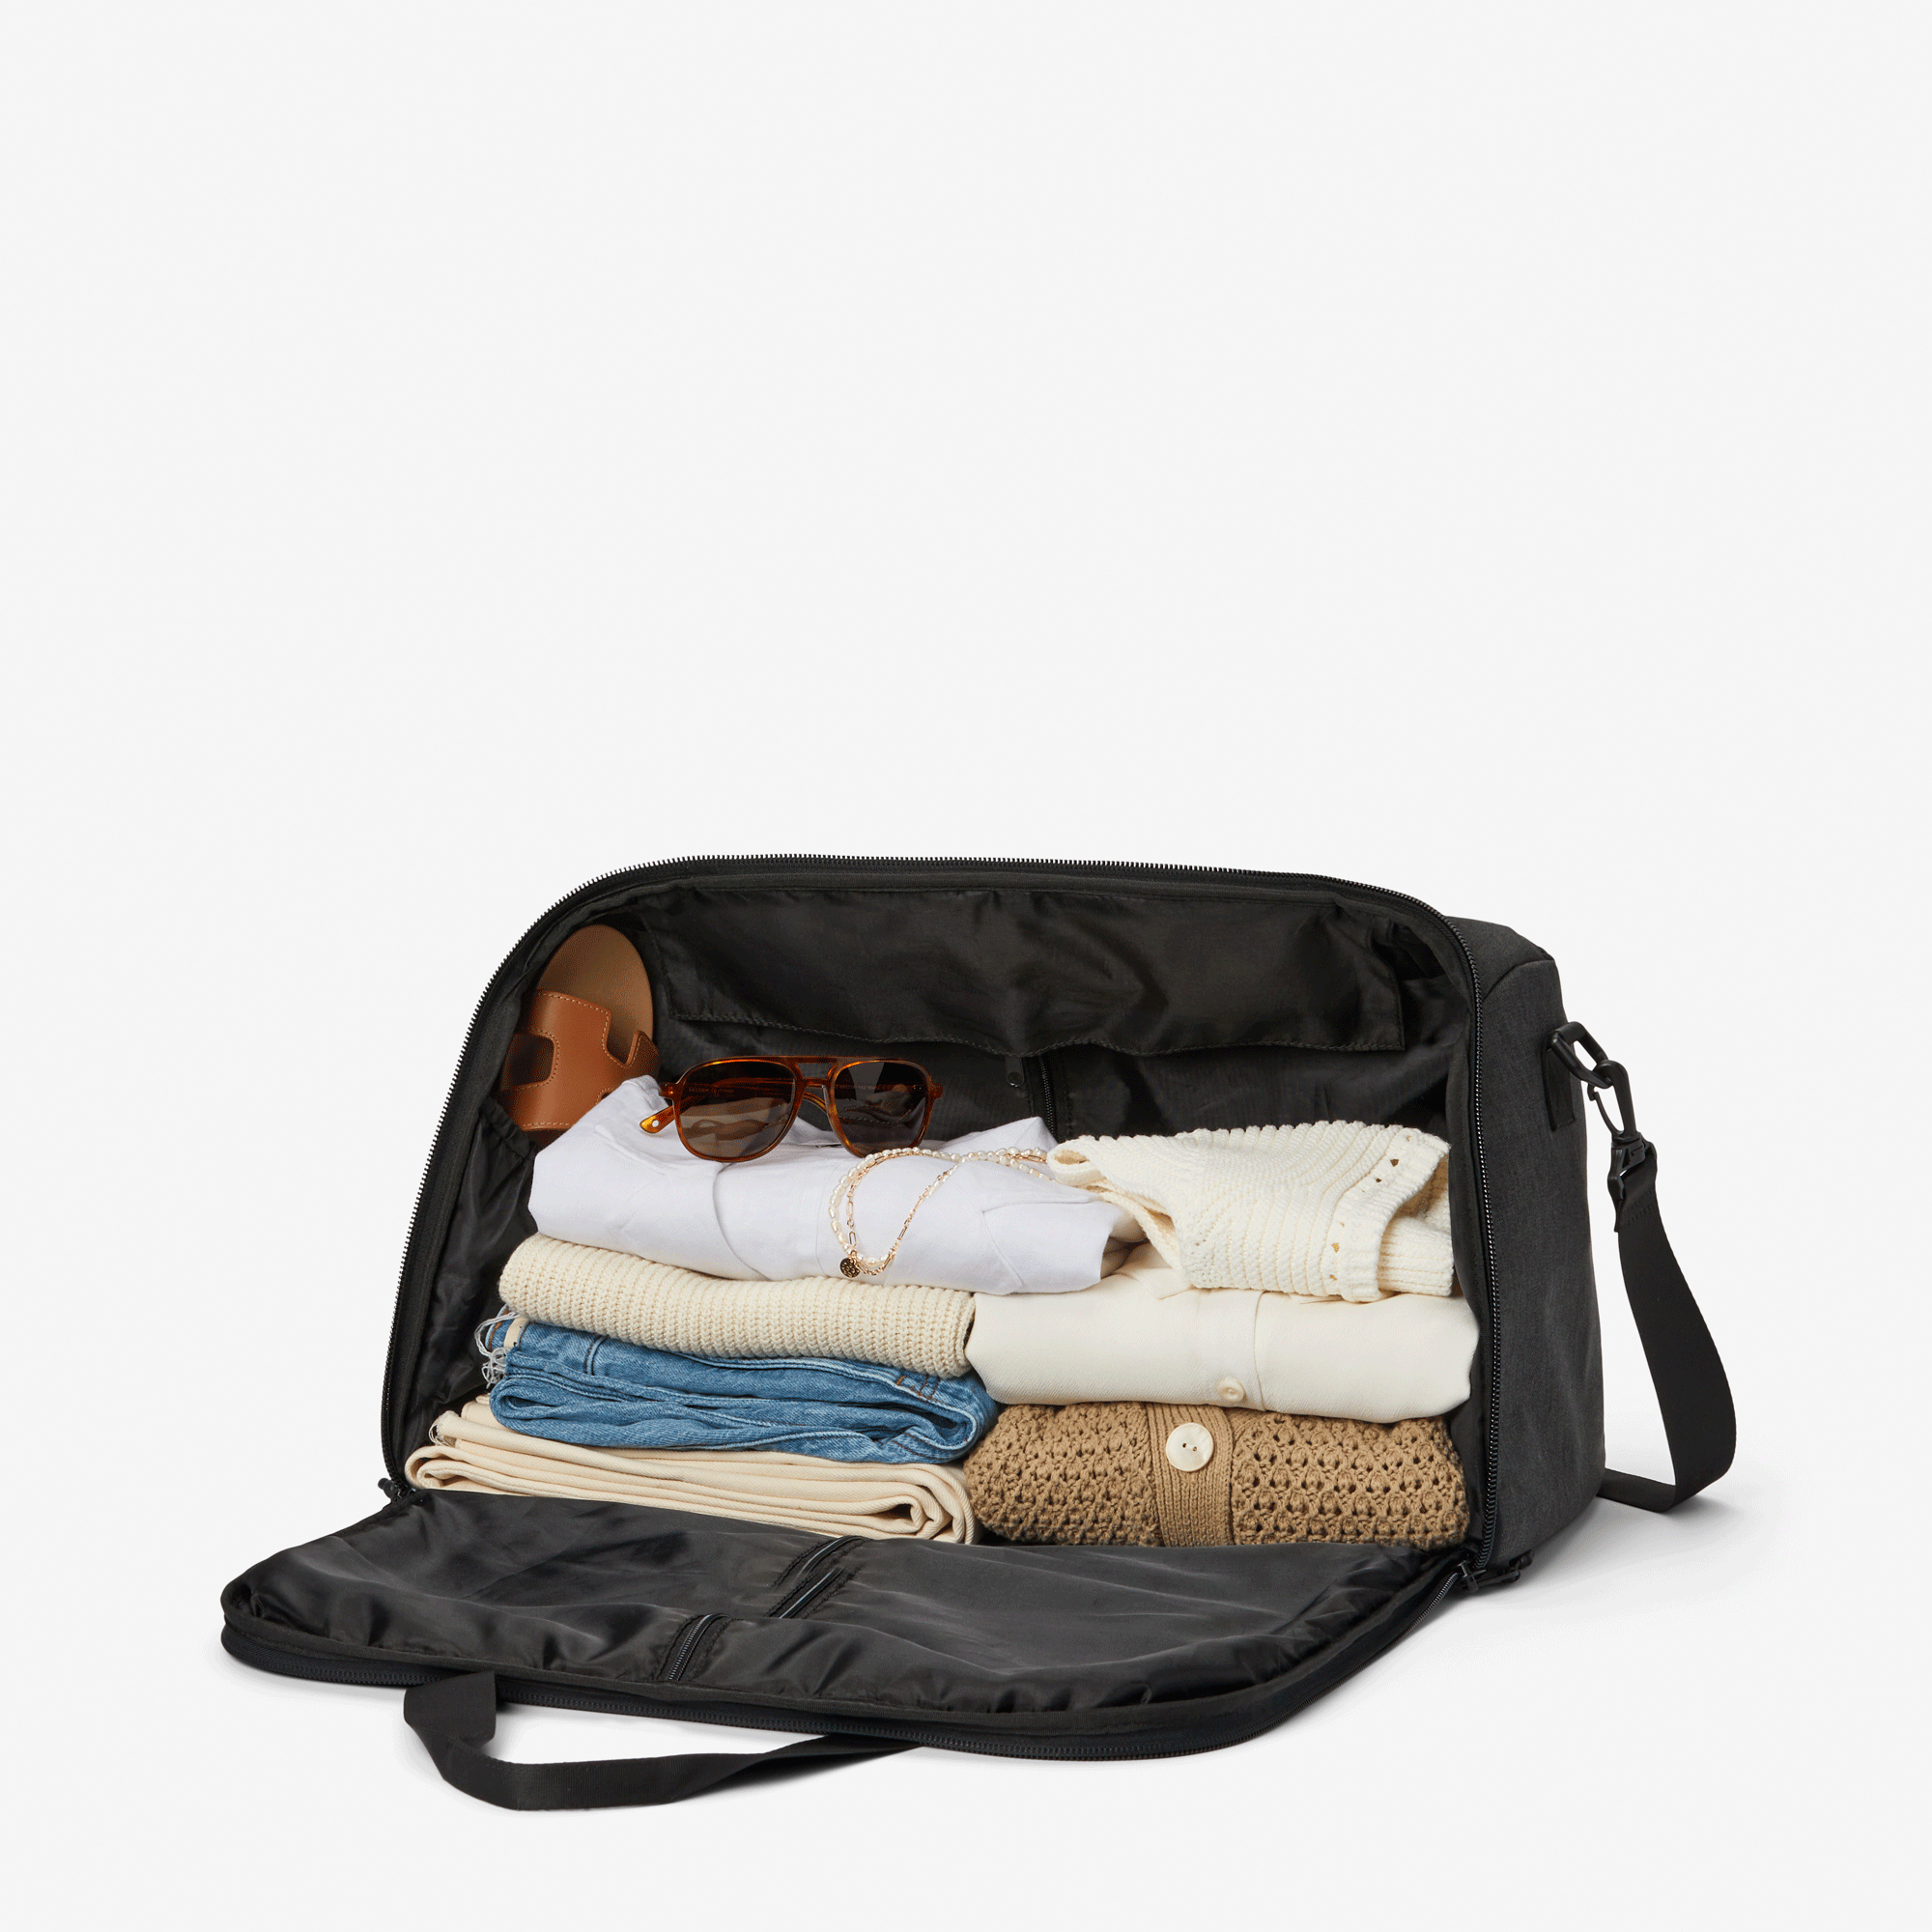 The Garment The Garment Duffel - Color Shadow - Size Compact